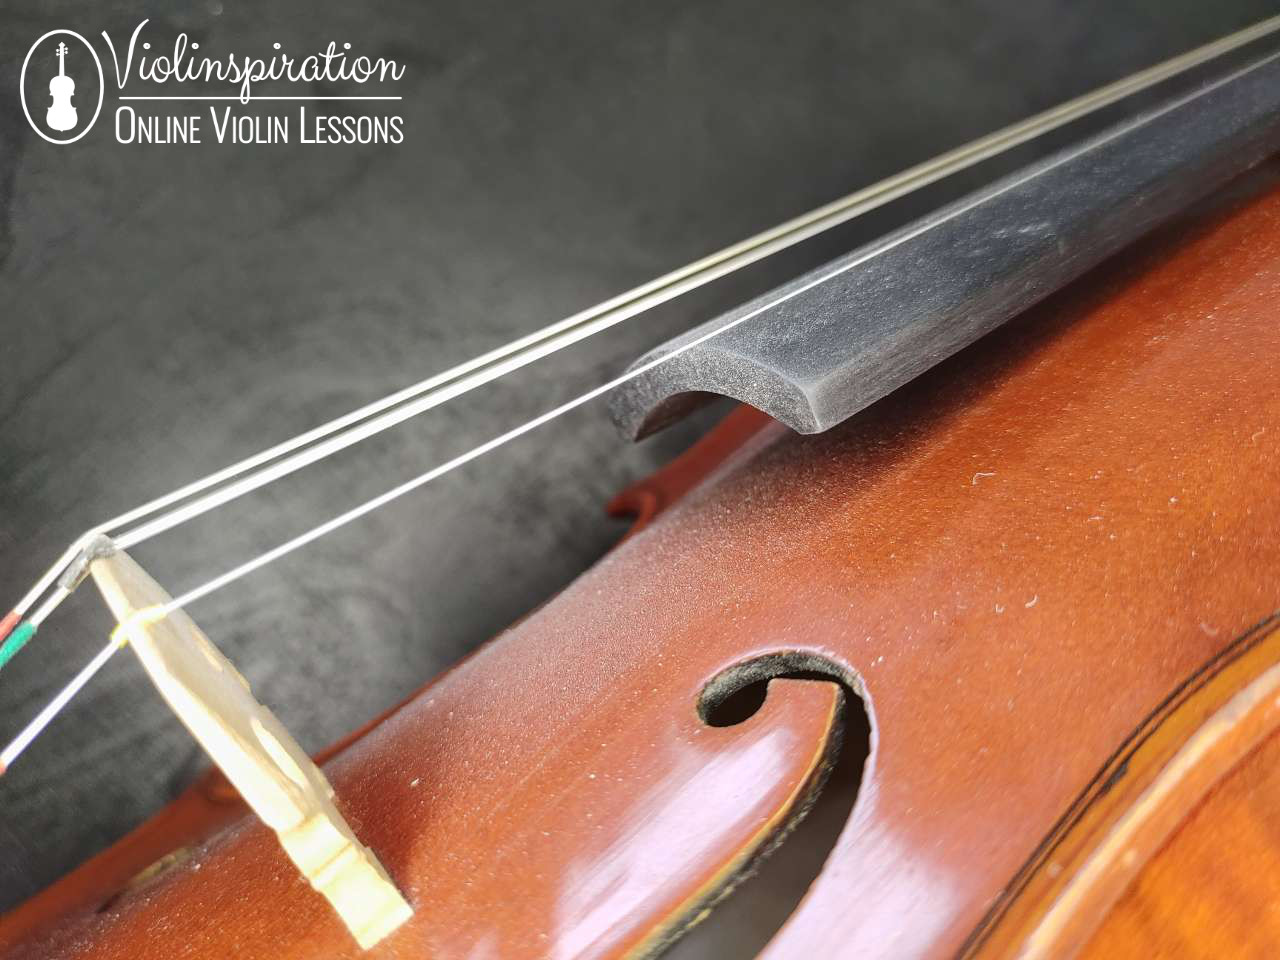 how to clean violin strings - violin close-up with rosin dust